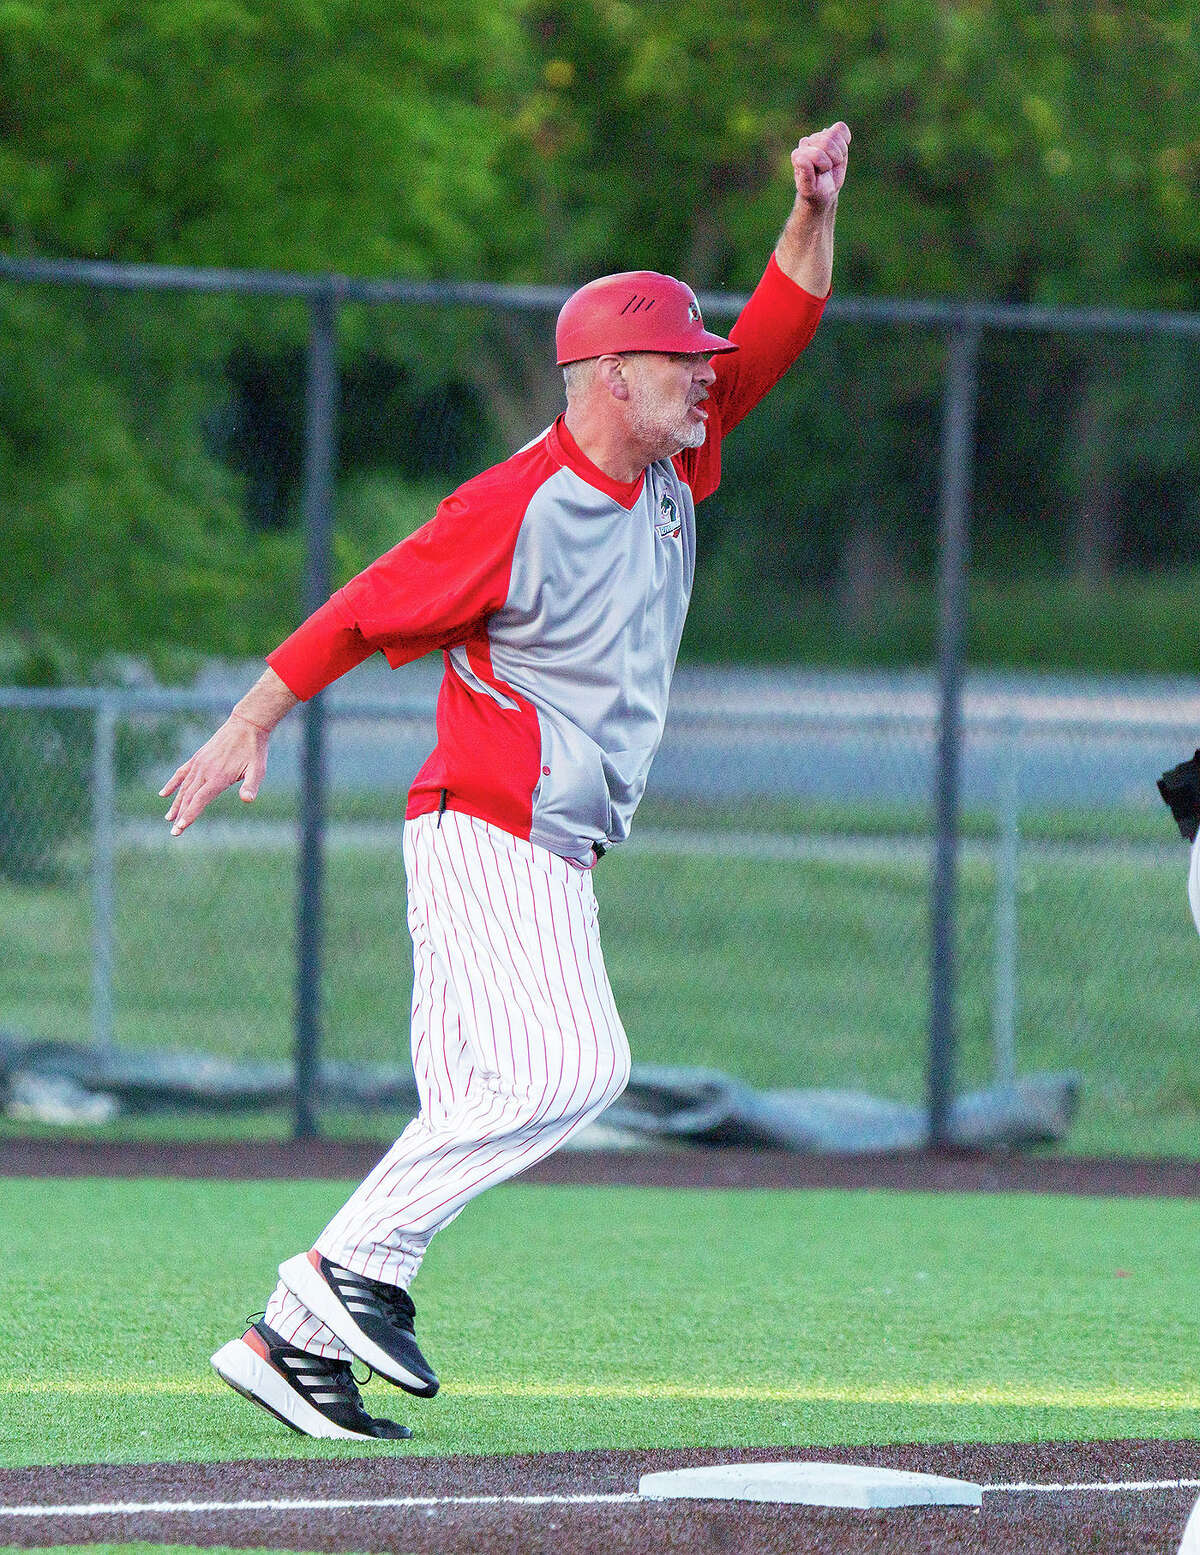 River Dragons manager Darrell Handelsman waves a runner around third during a game earlier this season.